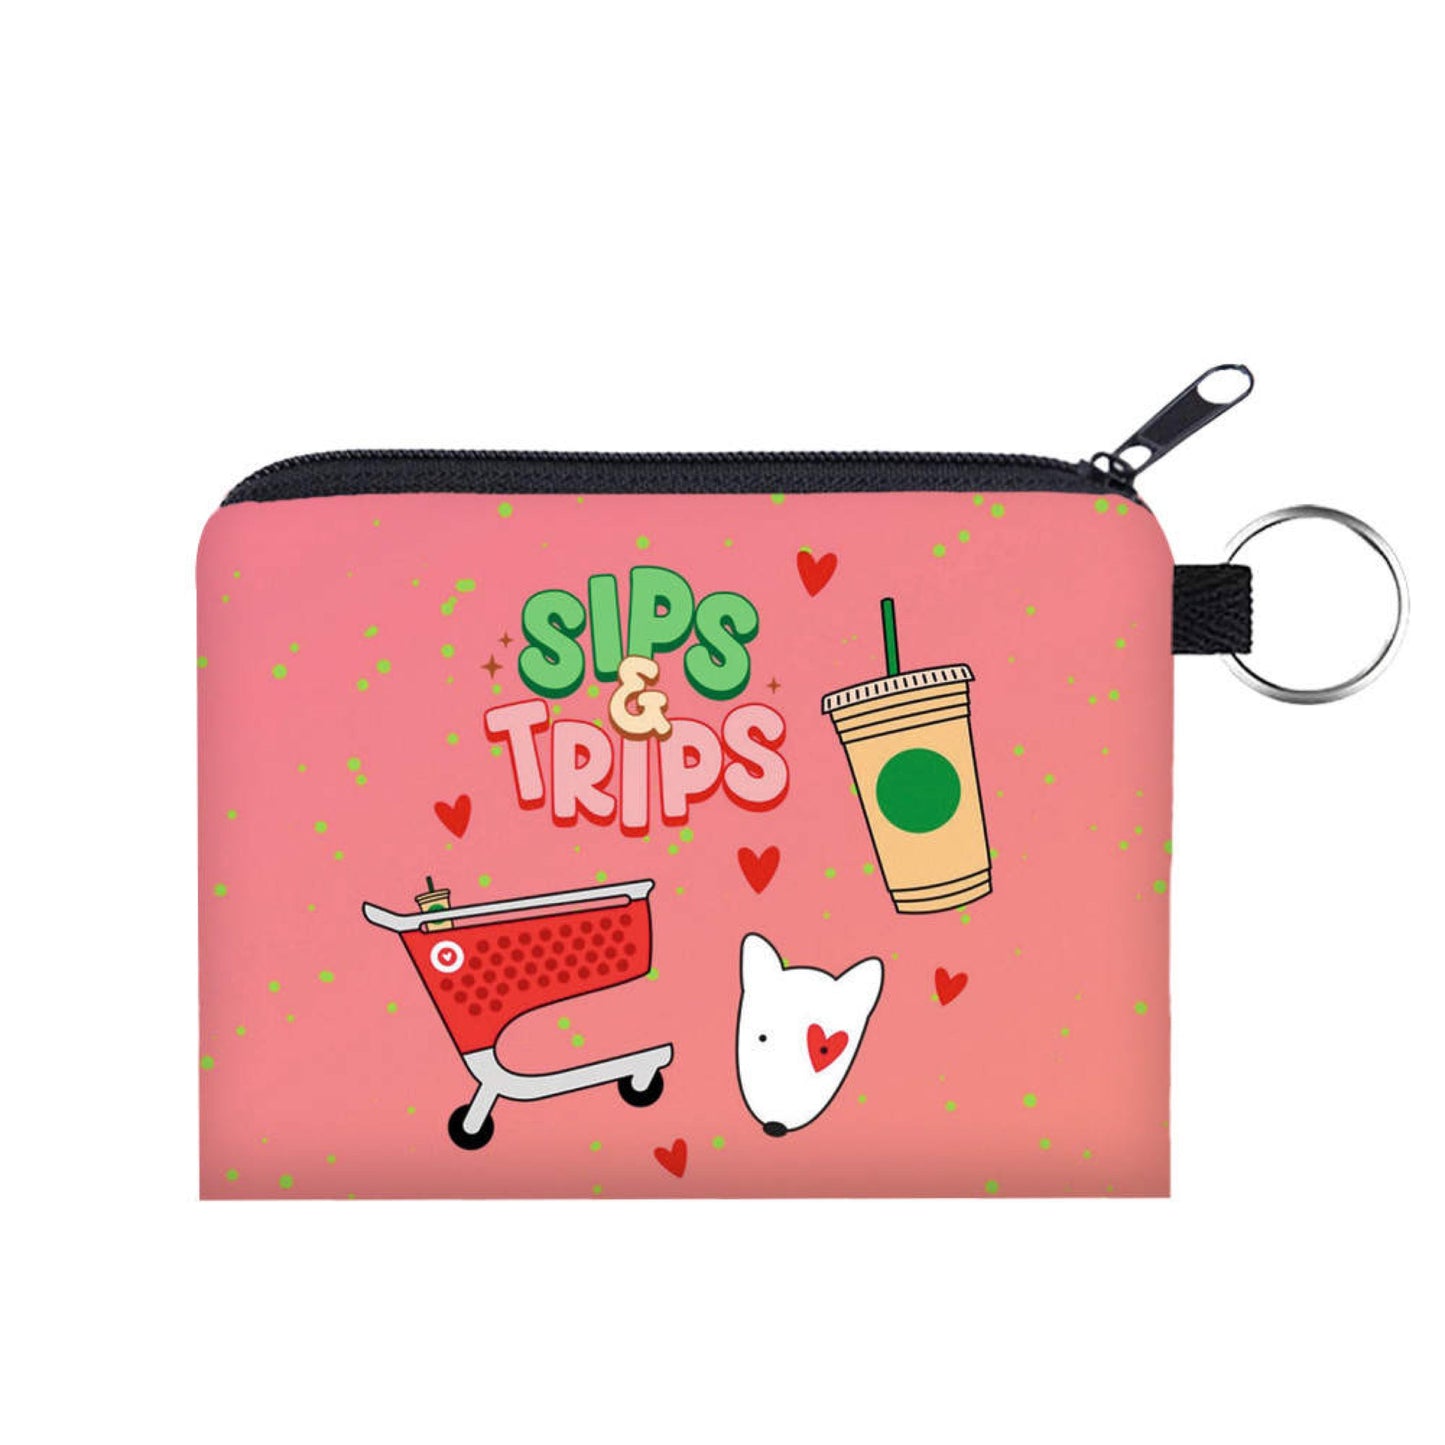 Sips & Trips - Water-Resistant Mini Pouch w/ Keyring